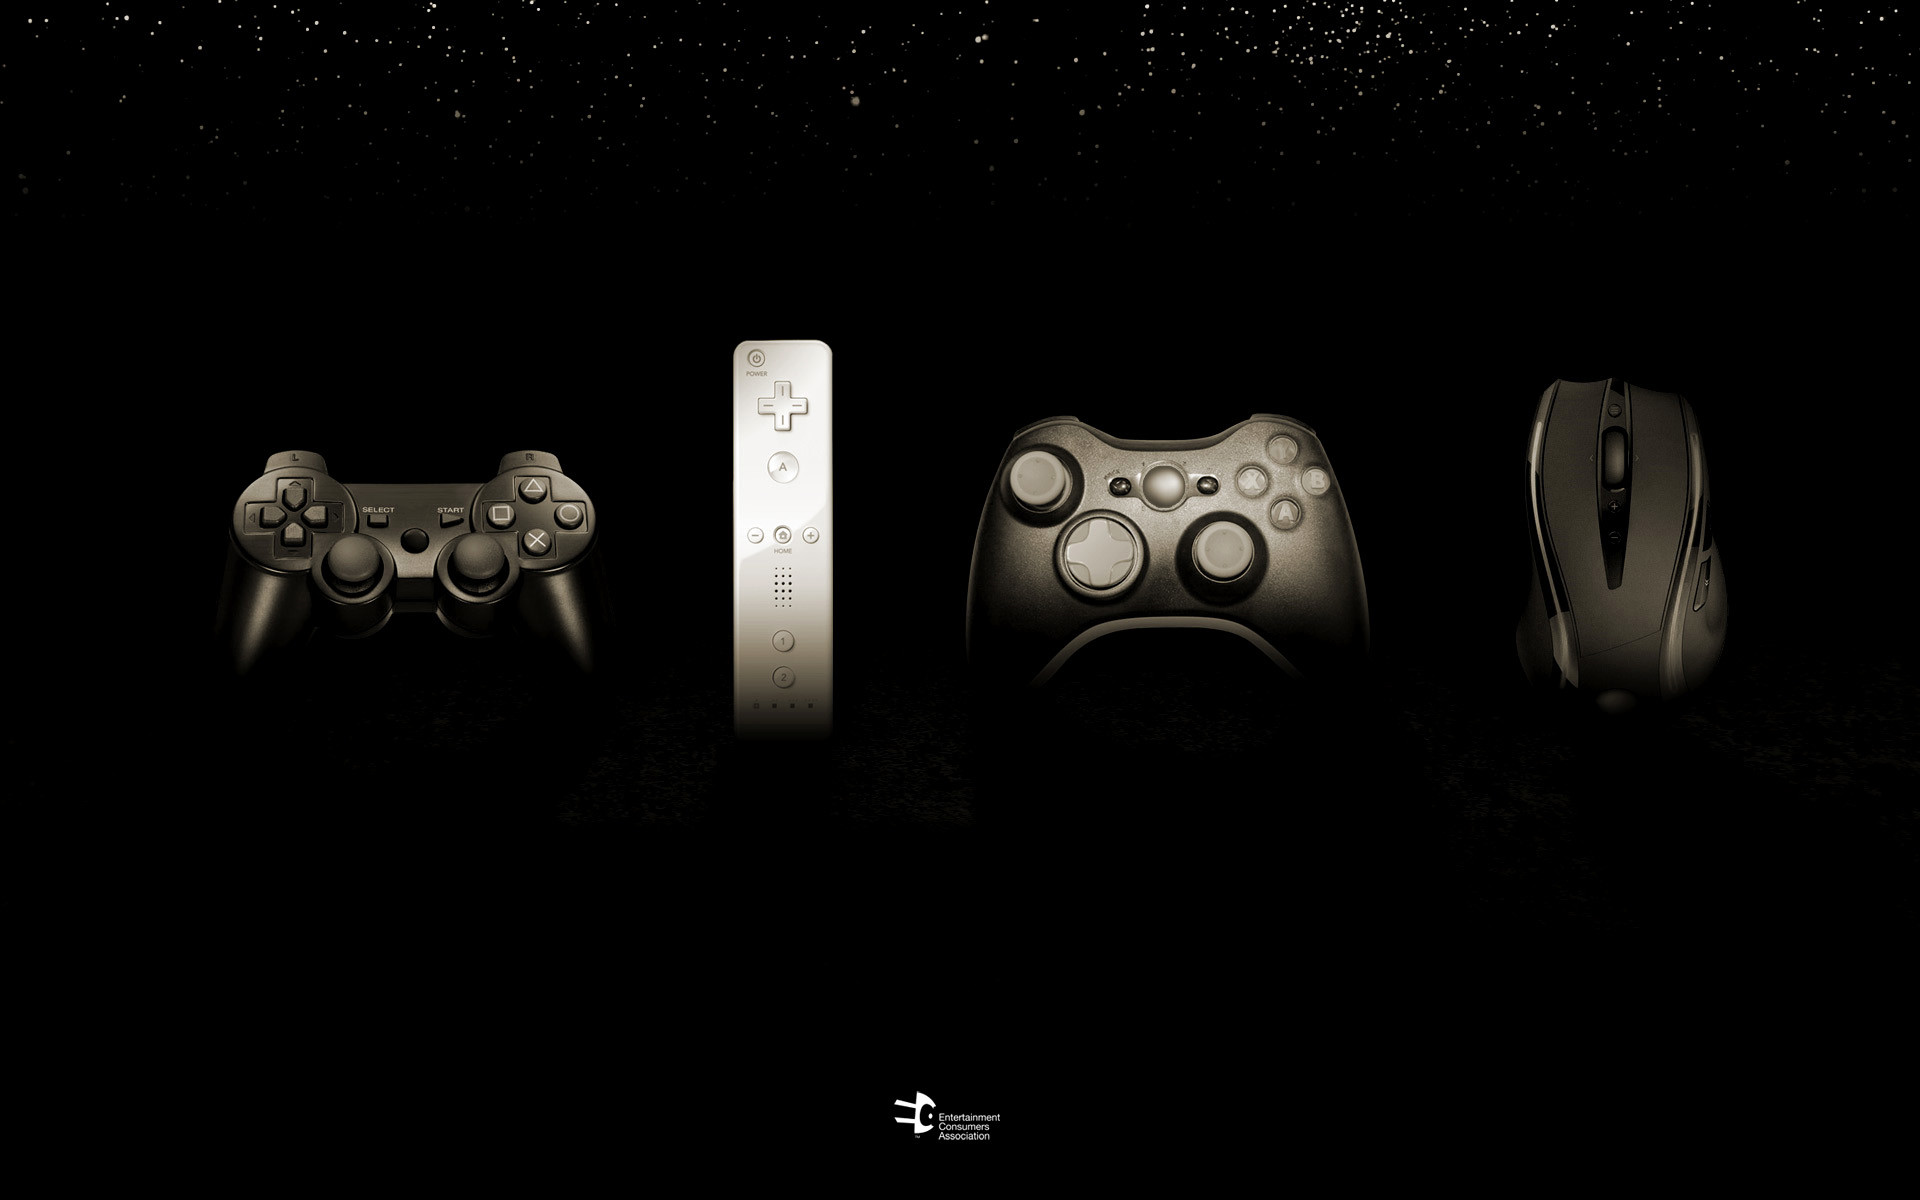 1920x1200 Video Game Controller Wallpapers For Iphone | Amazing Wallpapers |  Pinterest | Game controller and Wallpaper